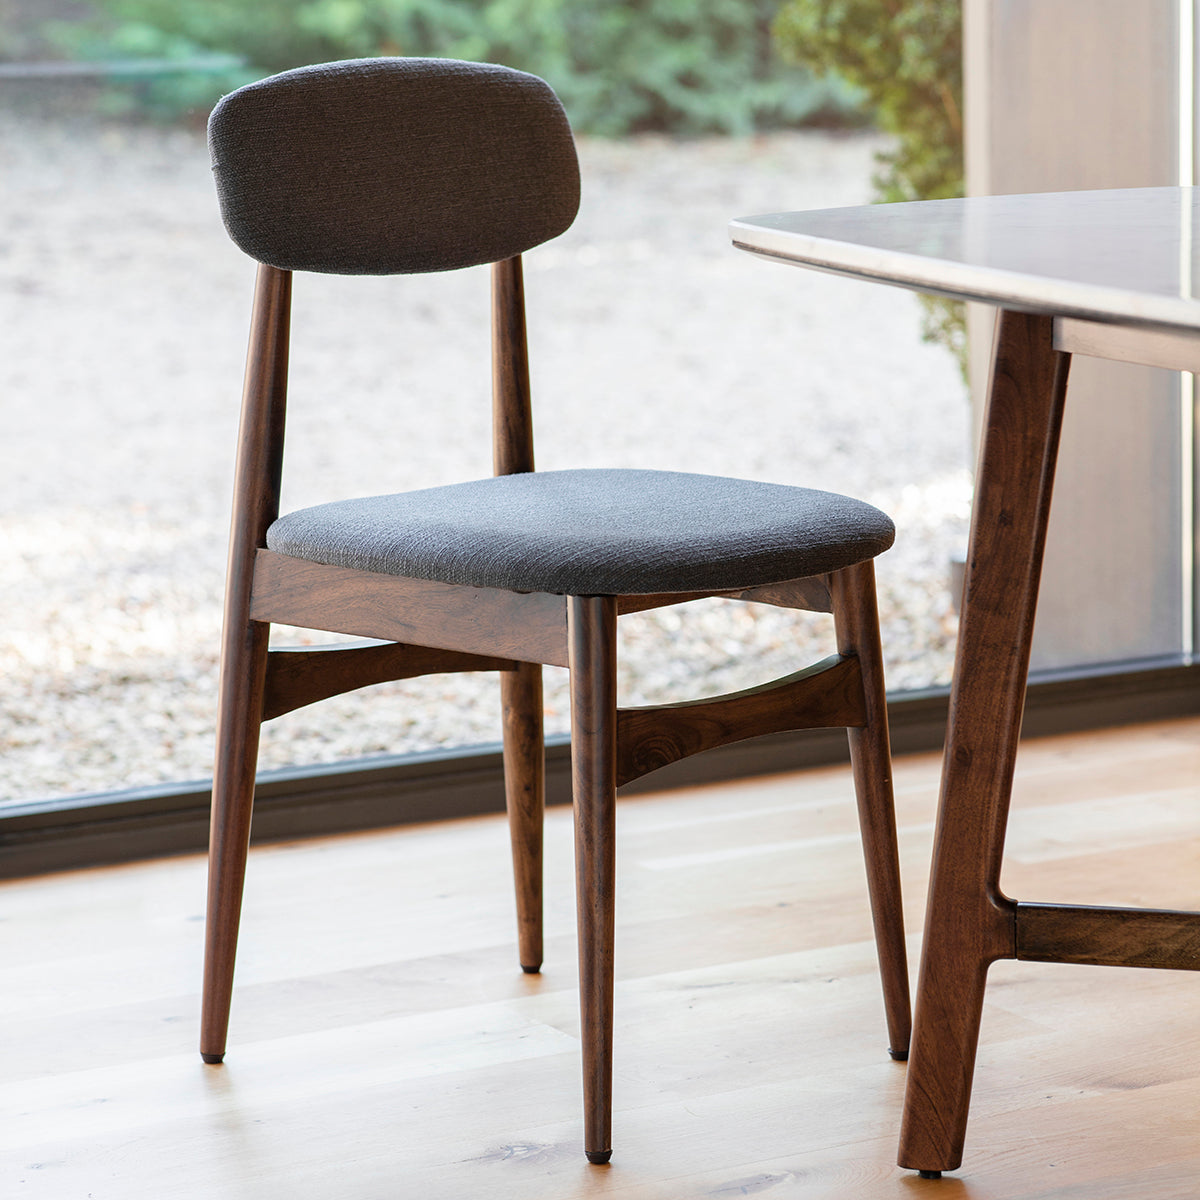 Minimalist elegant dining chair with tapered wooden legs and padded seat and backrest in room setting